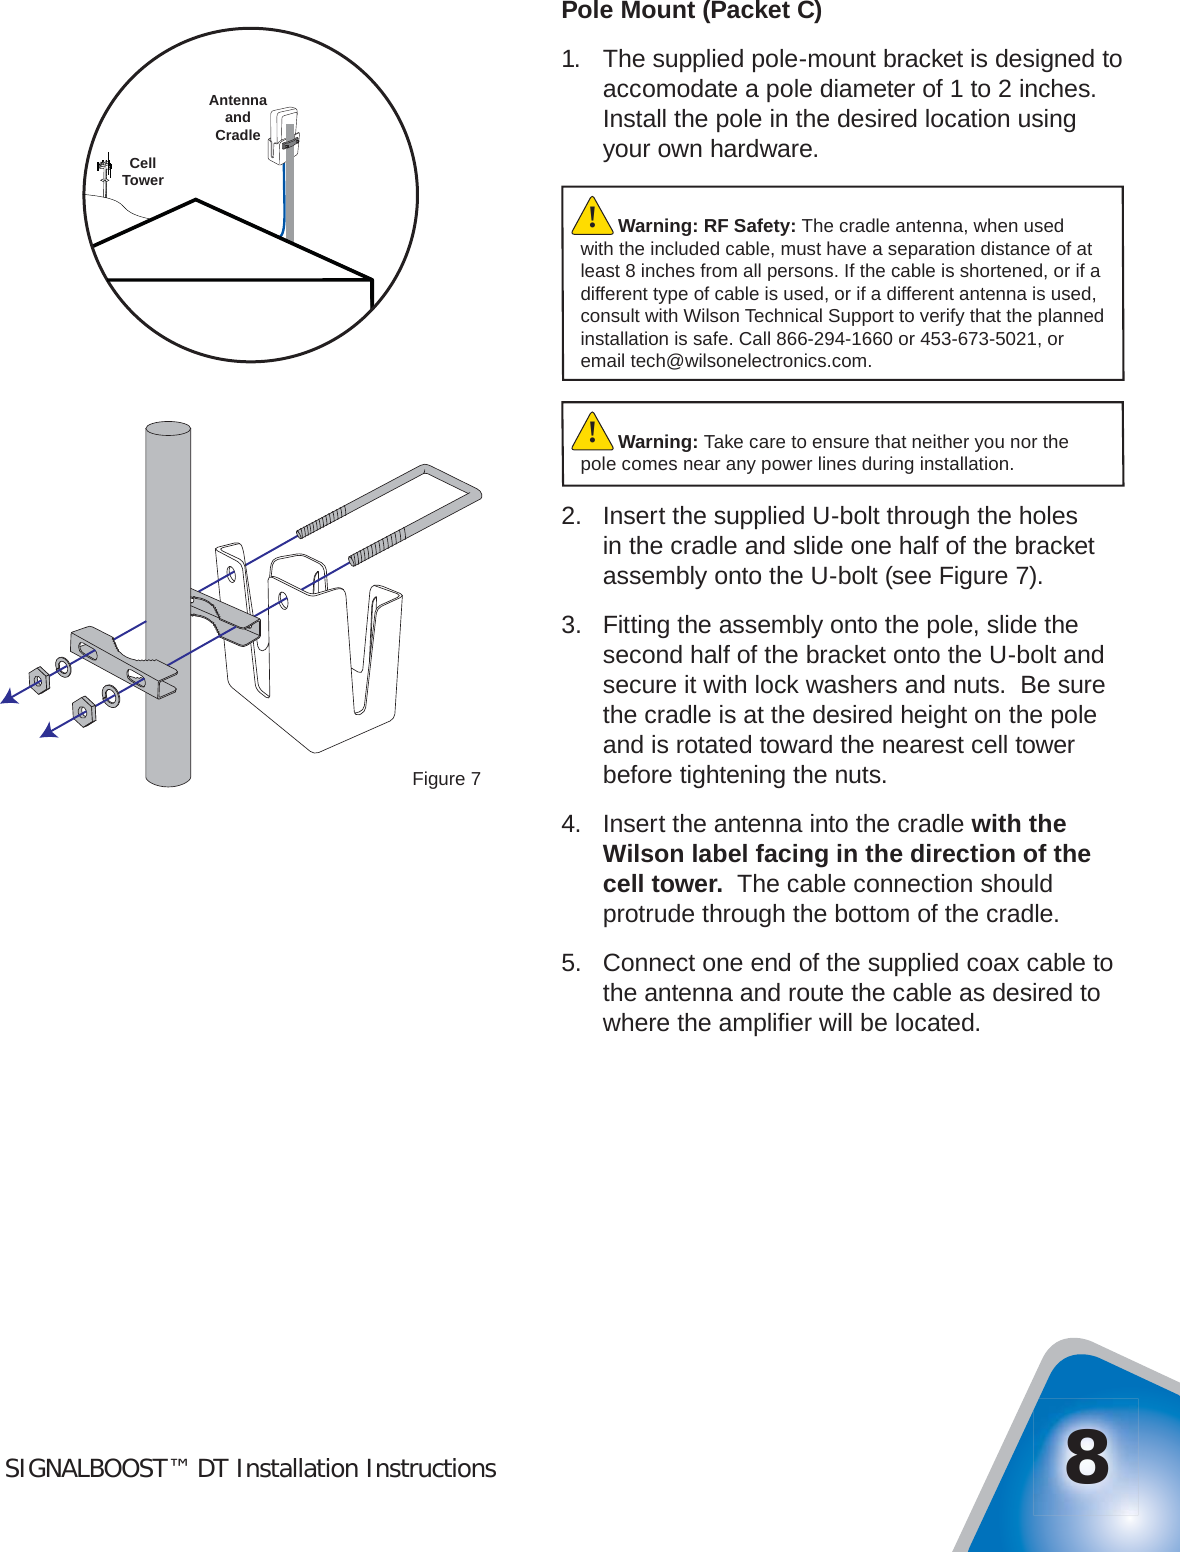 SIGNALBOOST™ DT Installation Instructions 8Pole Mount (Packet C)1.  The supplied pole-mount bracket is designed to accomodate a pole diameter of 1 to 2 inches.  Install the pole in the desired location using your own hardware.2.  Insert the supplied U-bolt through the holes in the cradle and slide one half of the bracket assembly onto the U-bolt (see Figure 7).3.  Fitting the assembly onto the pole, slide the second half of the bracket onto the U-bolt and secure it with lock washers and nuts.  Be sure the cradle is at the desired height on the pole and is rotated toward the nearest cell tower before tightening the nuts.4.  Insert the antenna into the cradle with the Wilson label facing in the direction of the cell tower.  The cable connection should protrude through the bottom of the cradle.5.  Connect one end of the supplied coax cable to the antenna and route the cable as desired to where the ampliﬁ er will be located.Figure 7CellTowerAntennaandCradleWarning: Take care to ensure that neither you nor the pole comes near any power lines during installation.!Warning: RF Safety: The cradle antenna, when used with the included cable, must have a separation distance of at least 8 inches from all persons. If the cable is shortened, or if a different type of cable is used, or if a different antenna is used, consult with Wilson Technical Support to verify that the planned installation is safe. Call 866-294-1660 or 453-673-5021, or email tech@wilsonelectronics.com.!